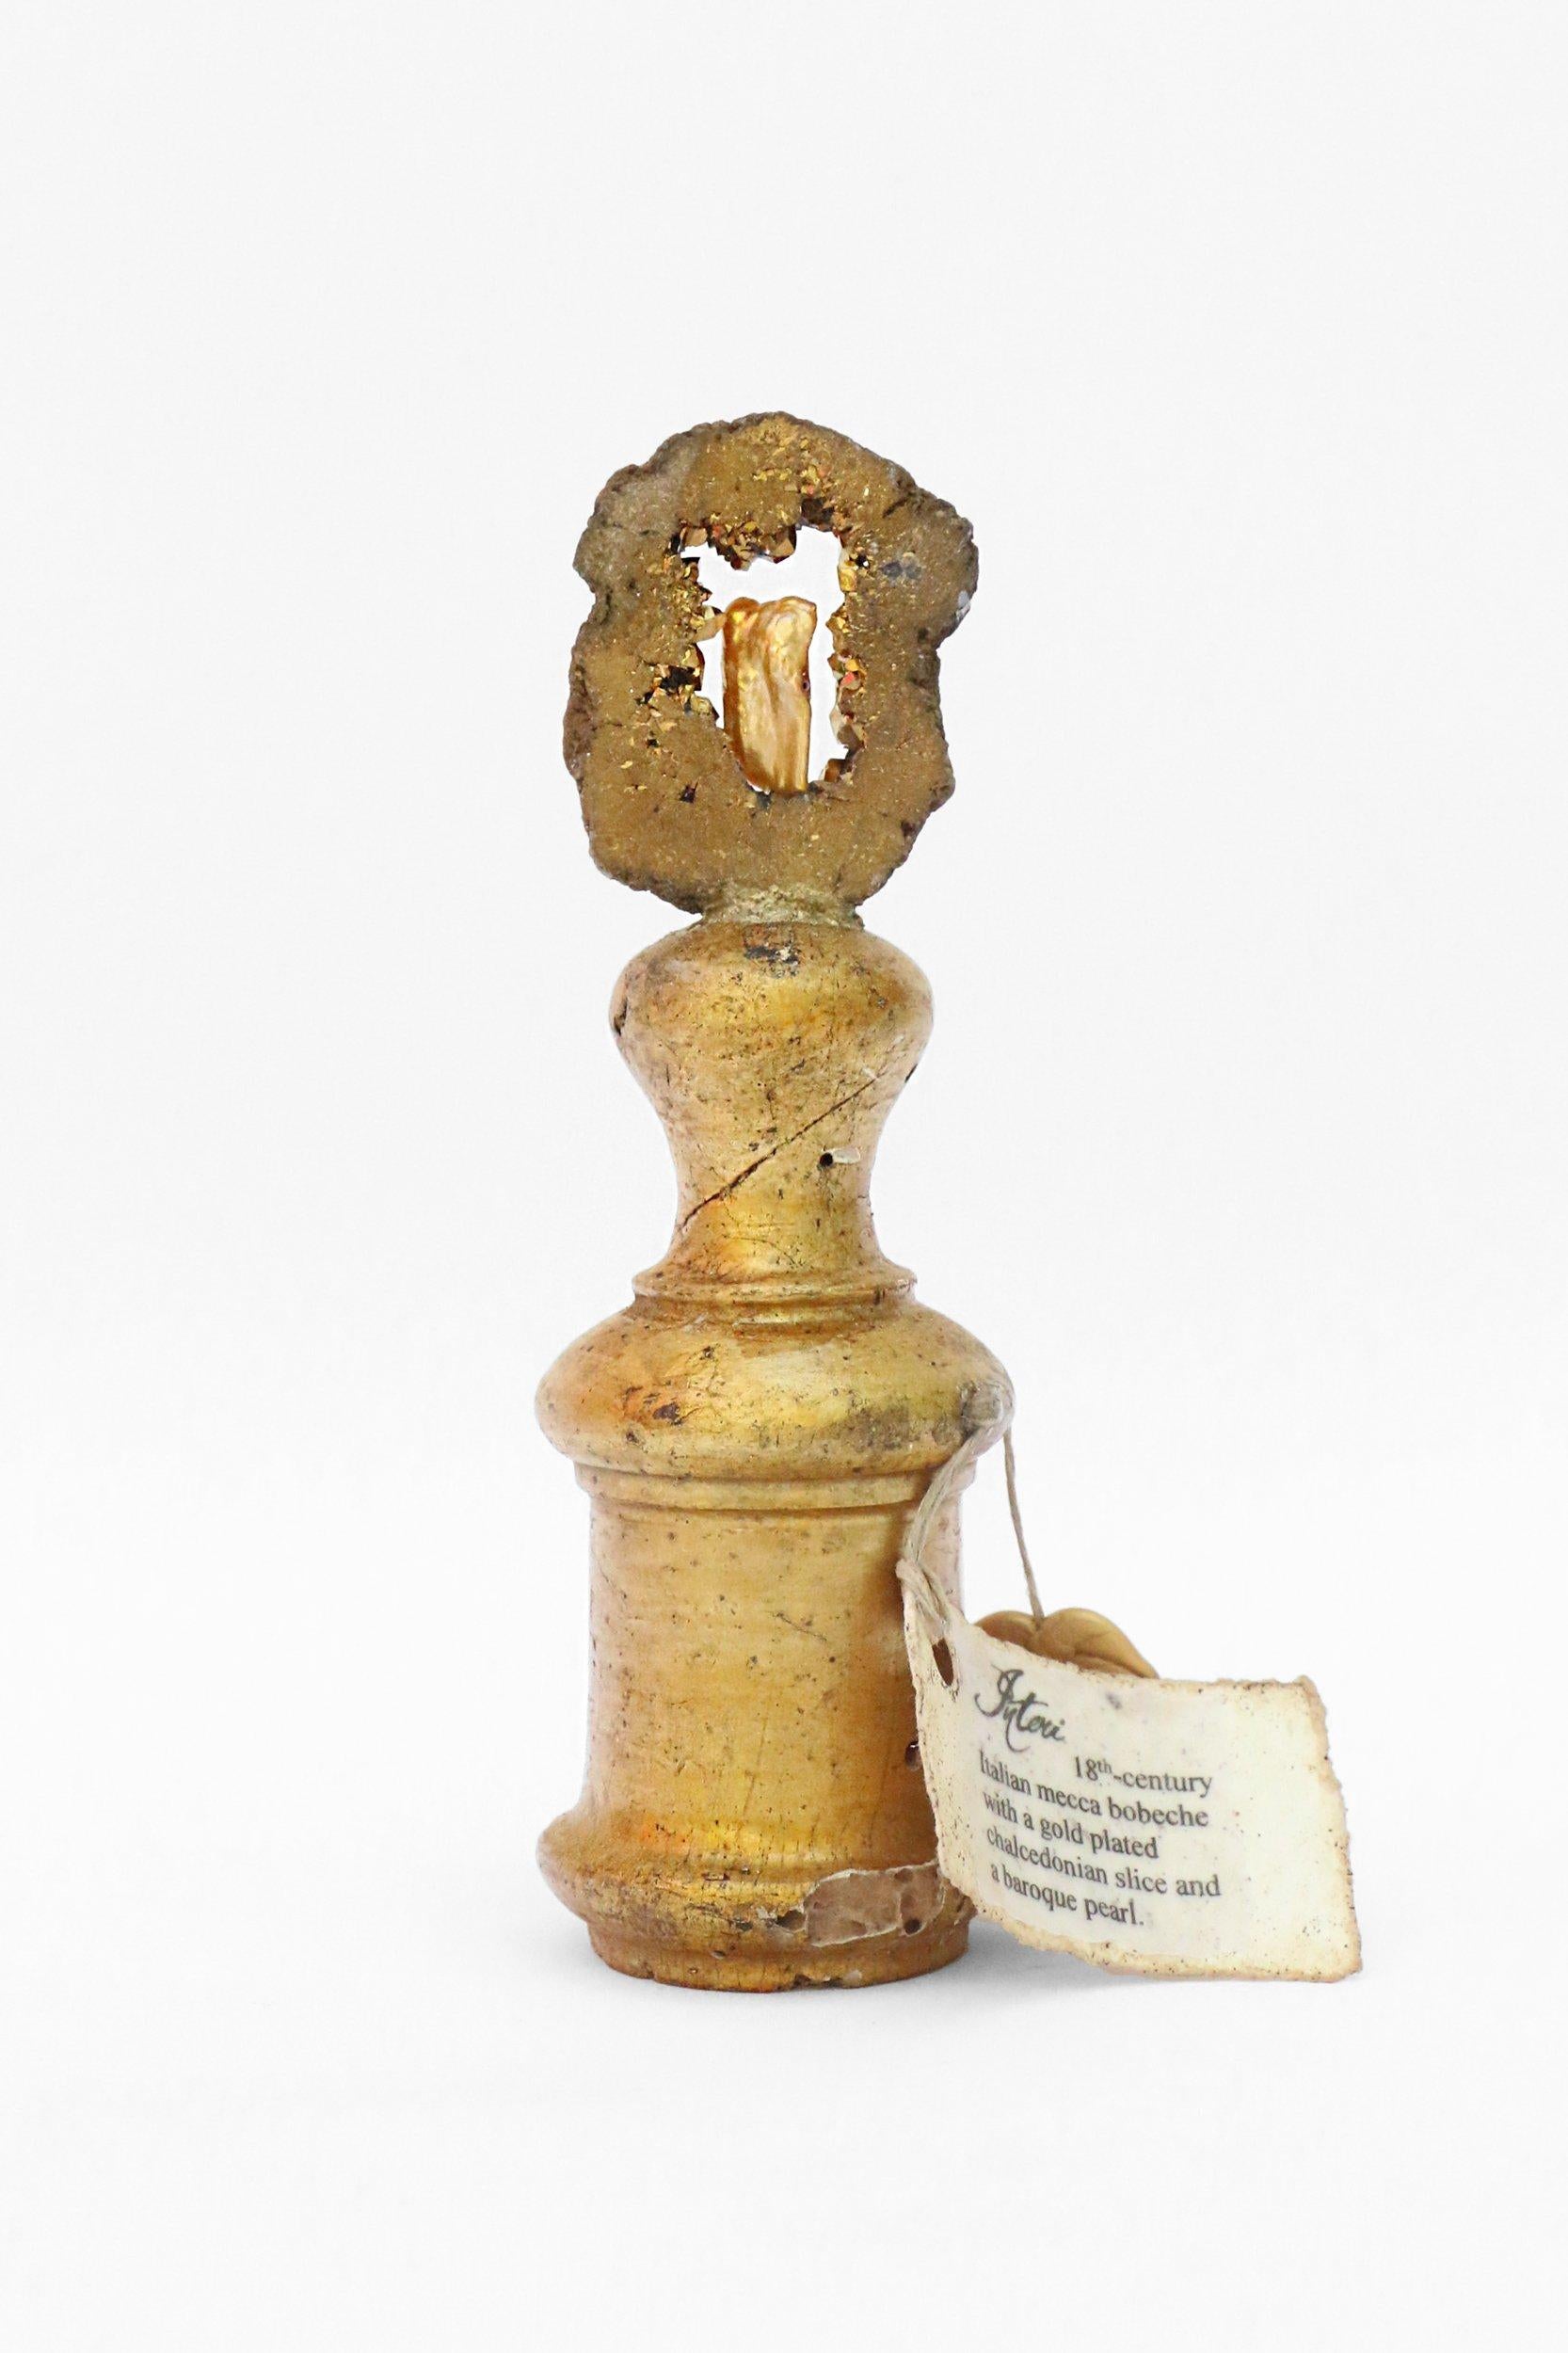 Hand-Carved 18th Century Italian Candlestick Holder with a Gold Plated Chalcedony & Pearl